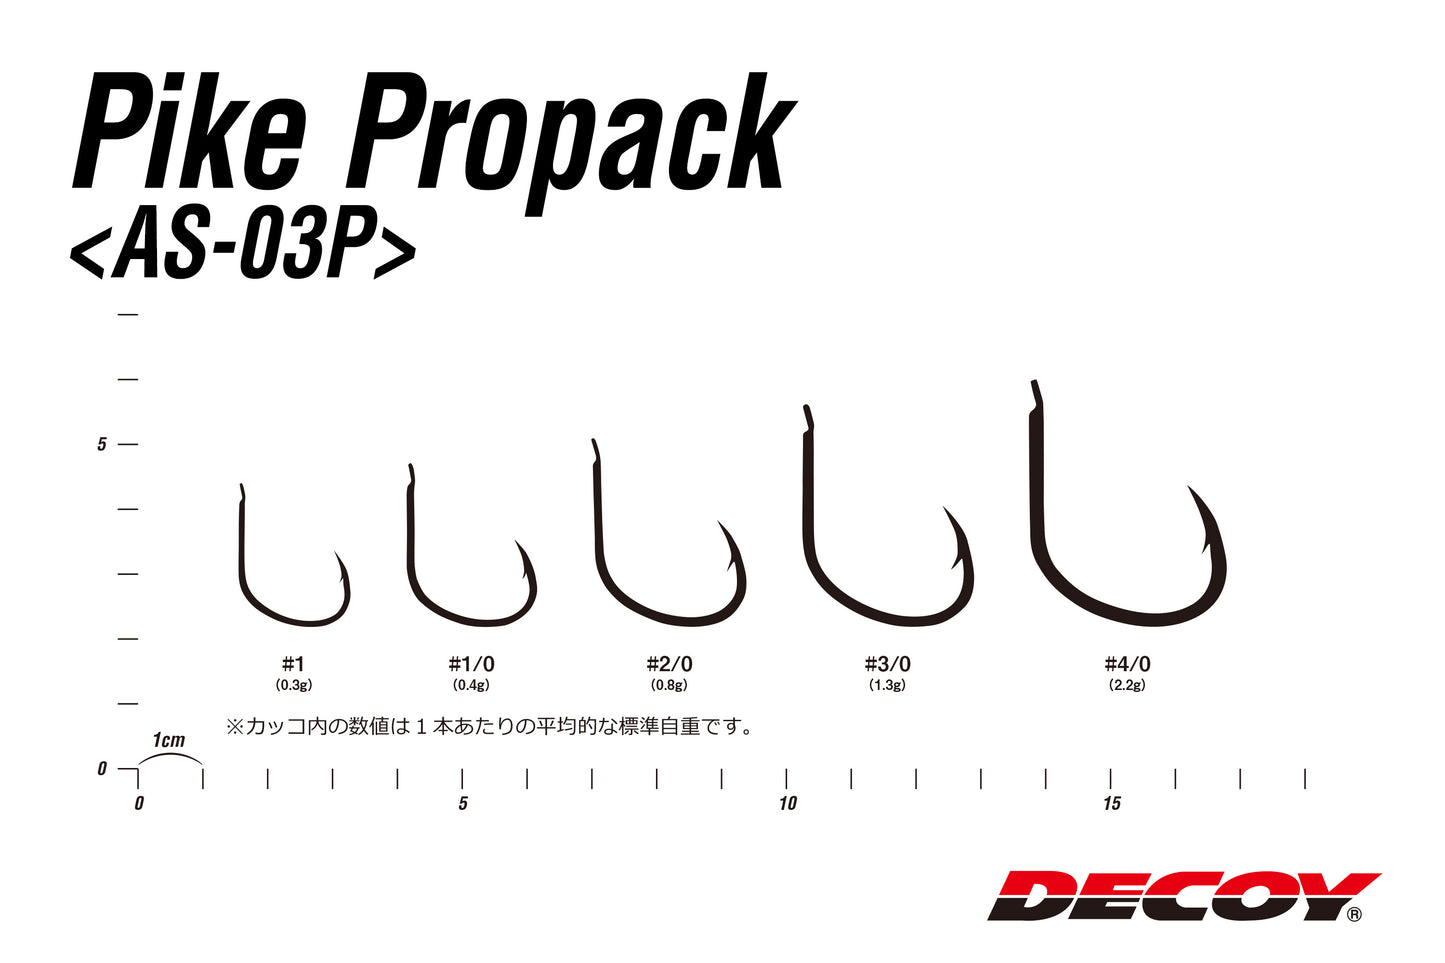 Decoy Pike "Propack" (AS-03P)